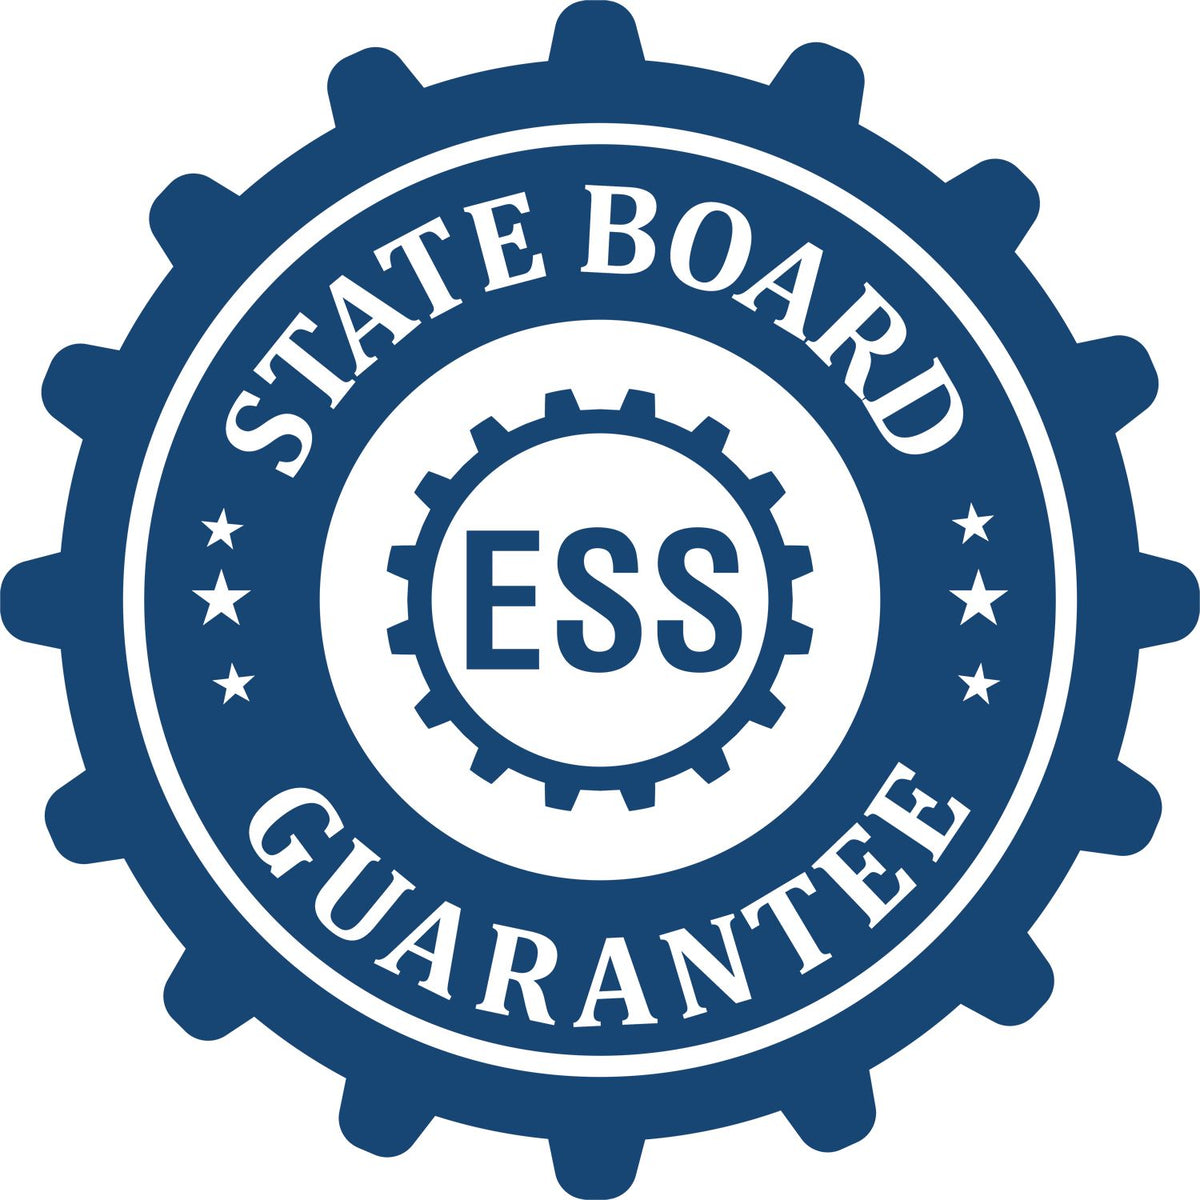 An emblem in a gear shape illustrating a state board guarantee for the Nevada Engineer Desk Seal product.